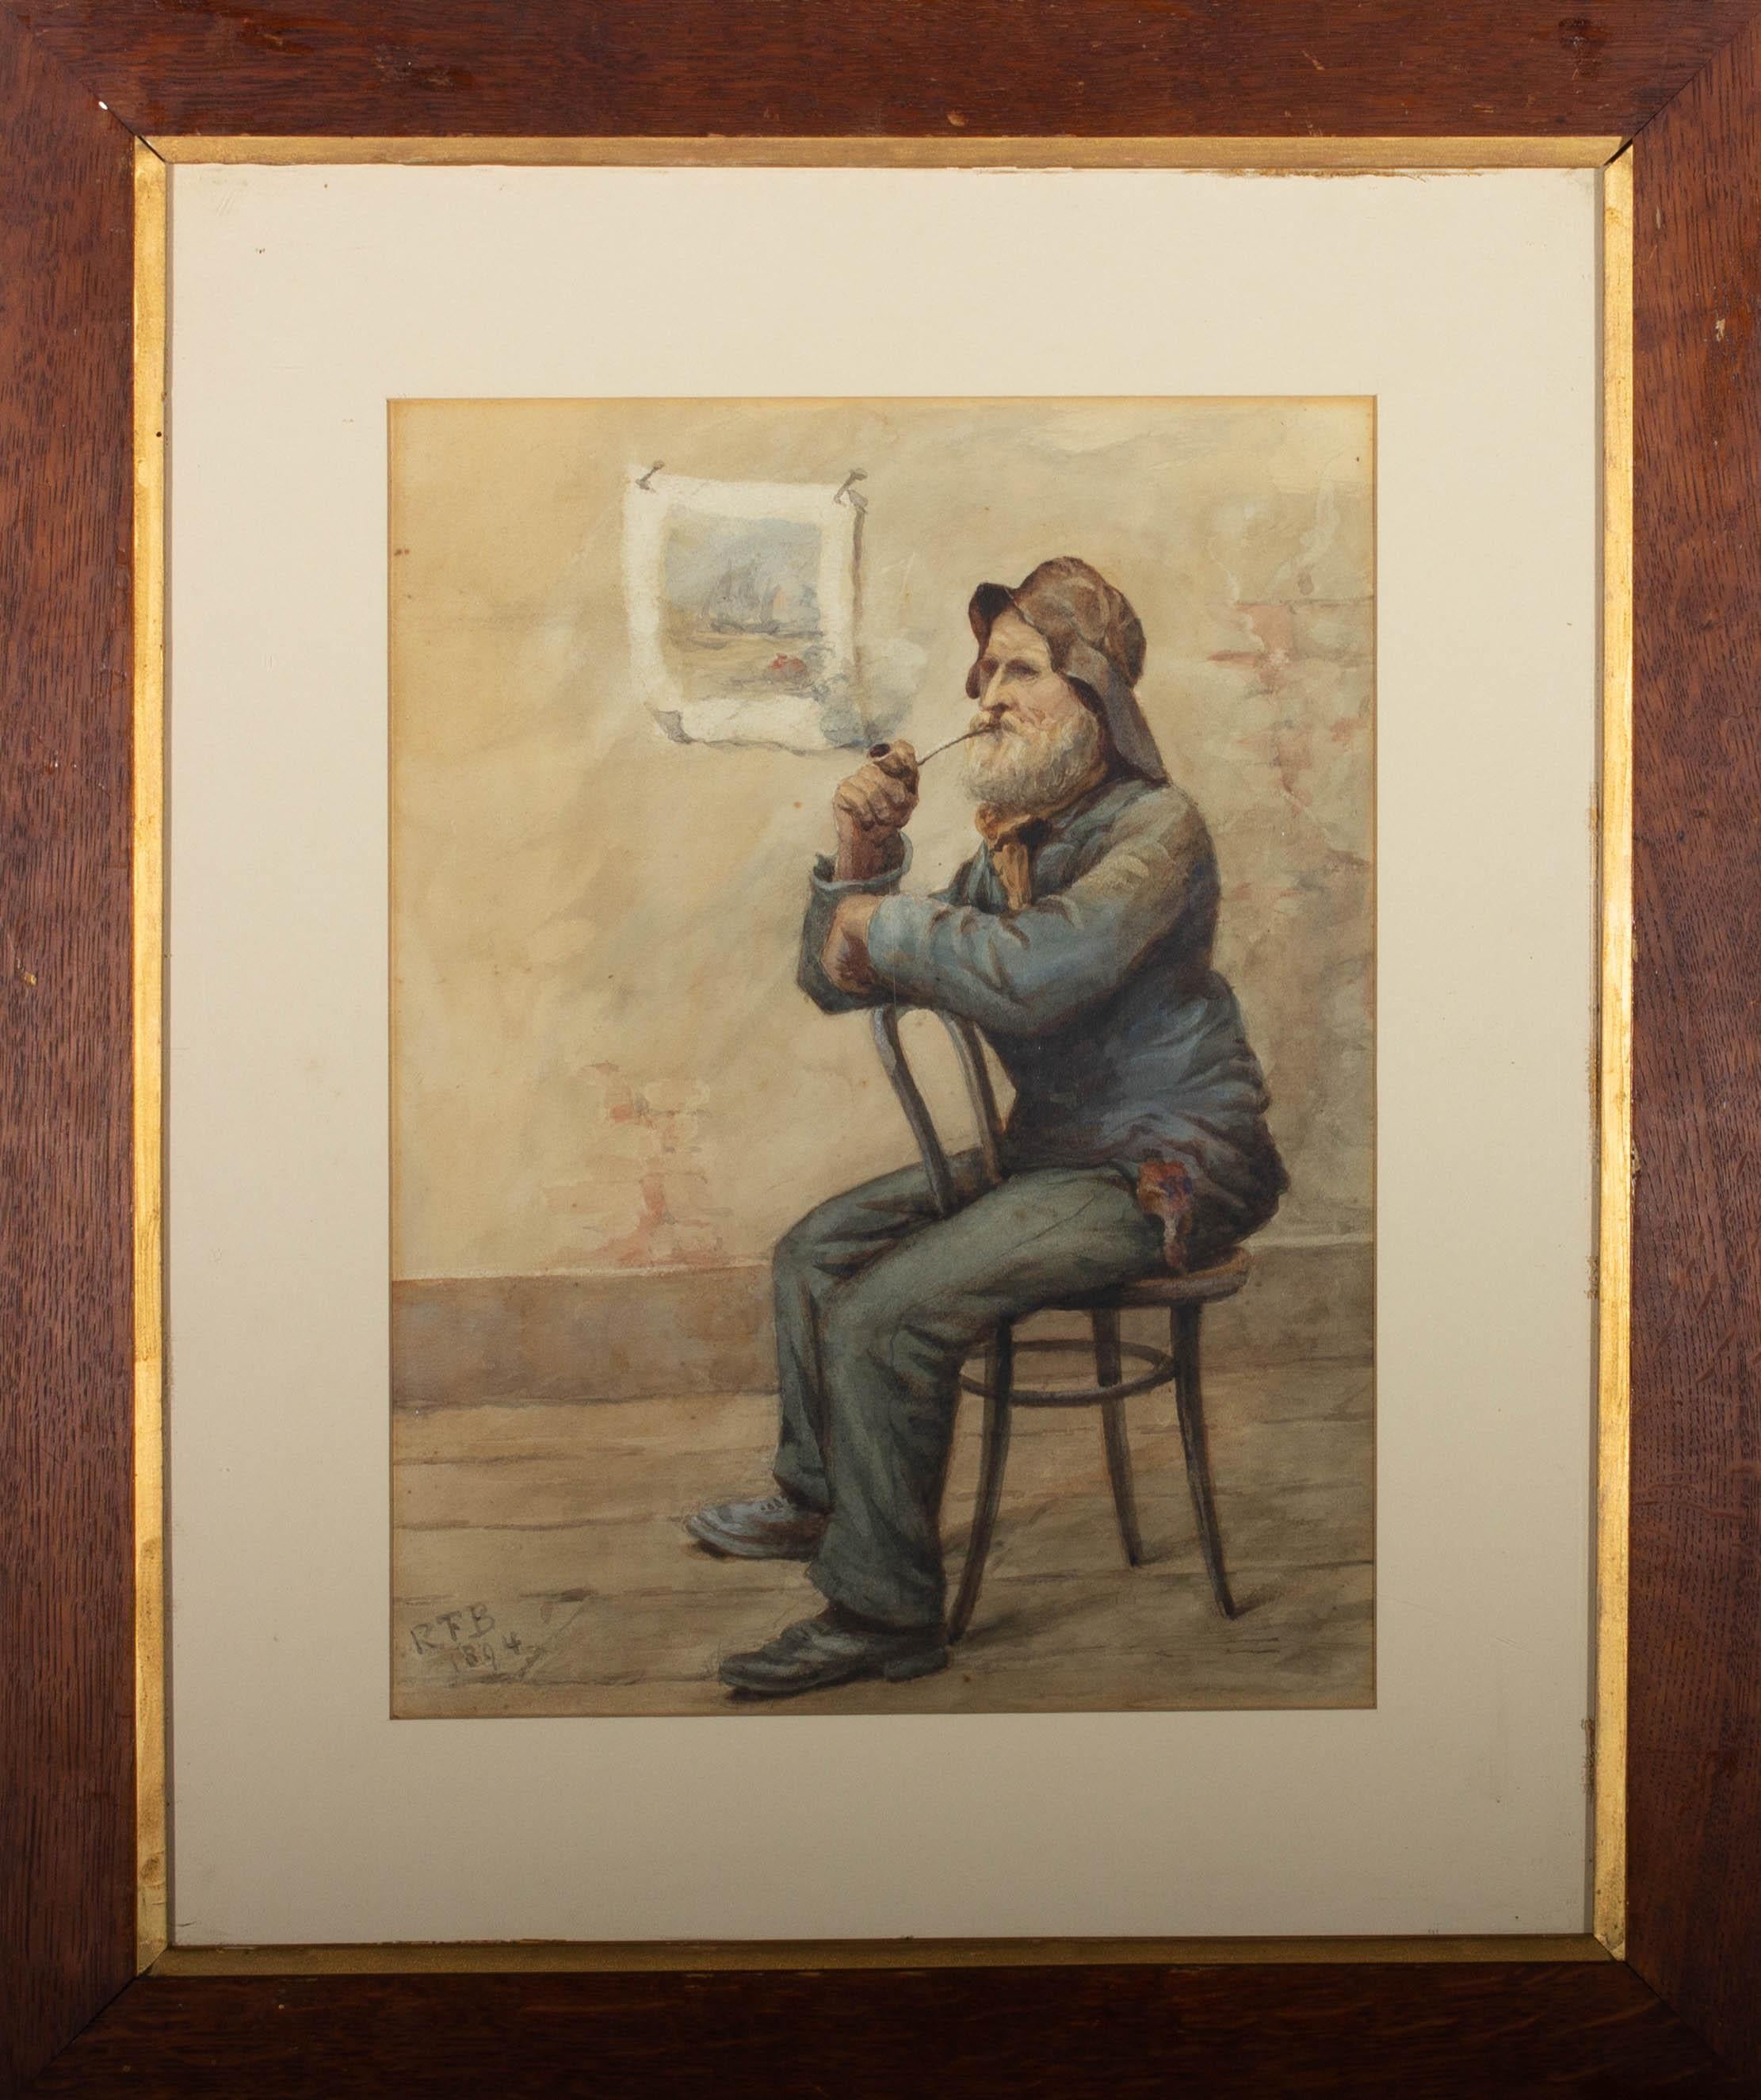 This portrait is of a fisherman sat on a wooden chair smoking his pipe. The fine detail of the painting shows the textures of the man's rain hat and heavy jacket, depicting the nature his work at sea. In the background we are shown a pinned up